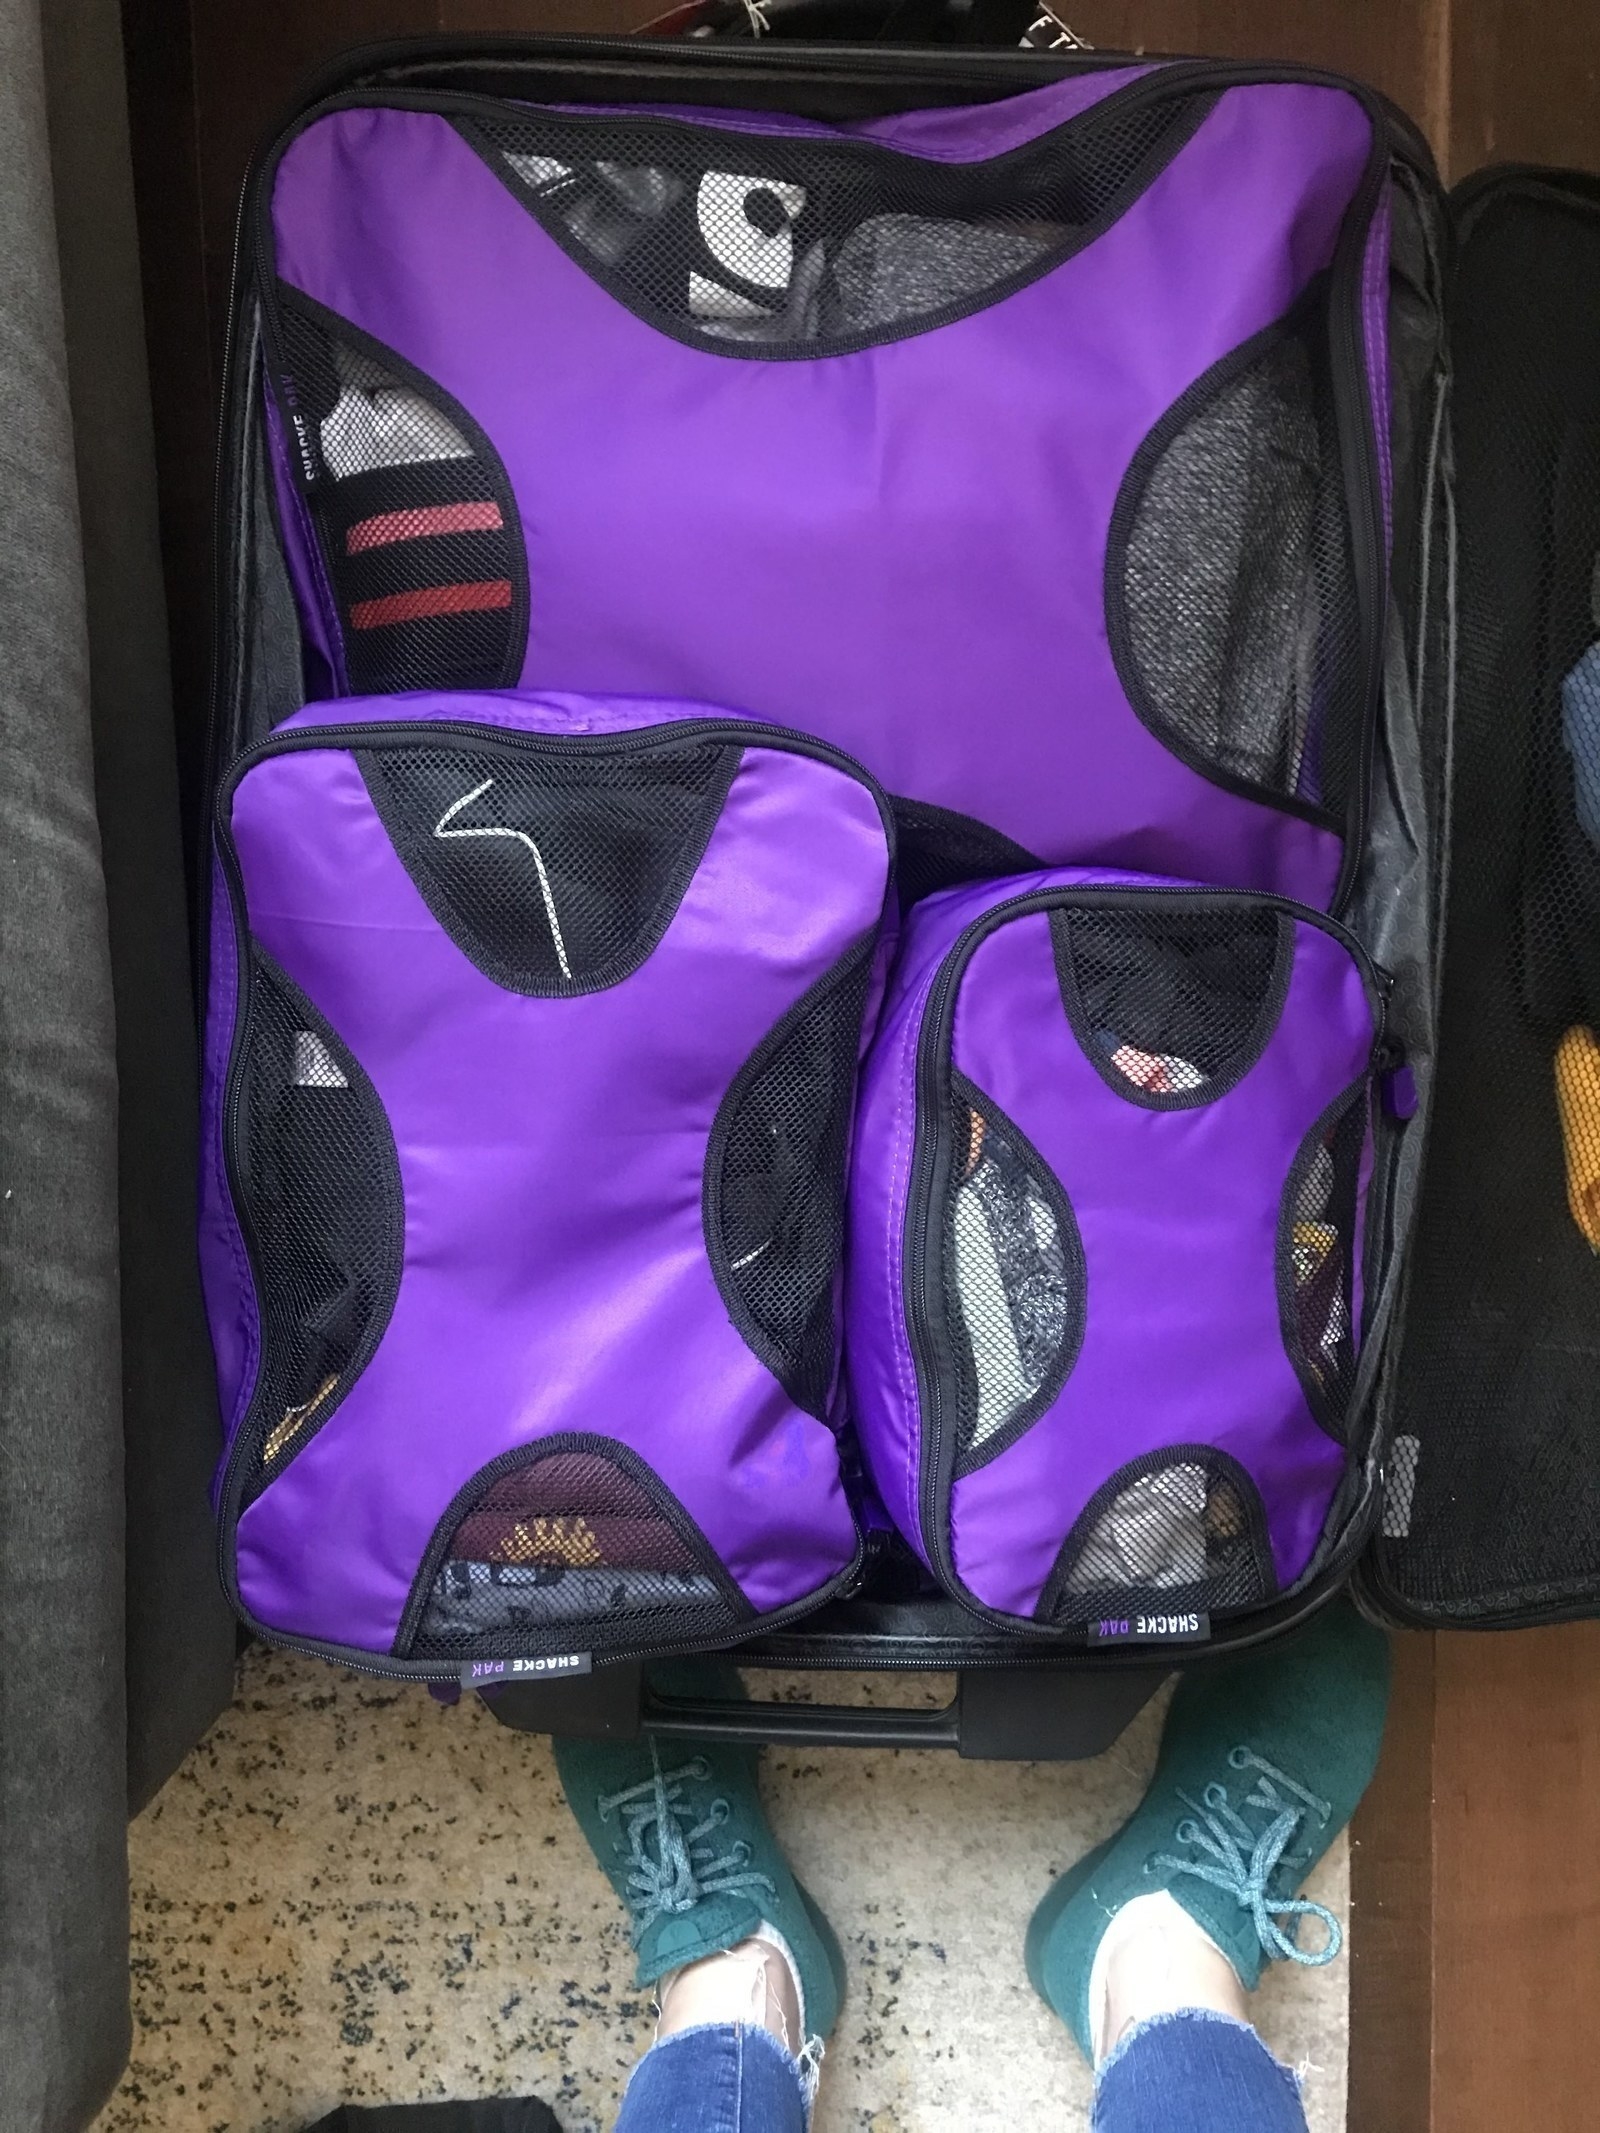 writer&#x27;s suitcase full of three purple mesh and fabric packing cubes